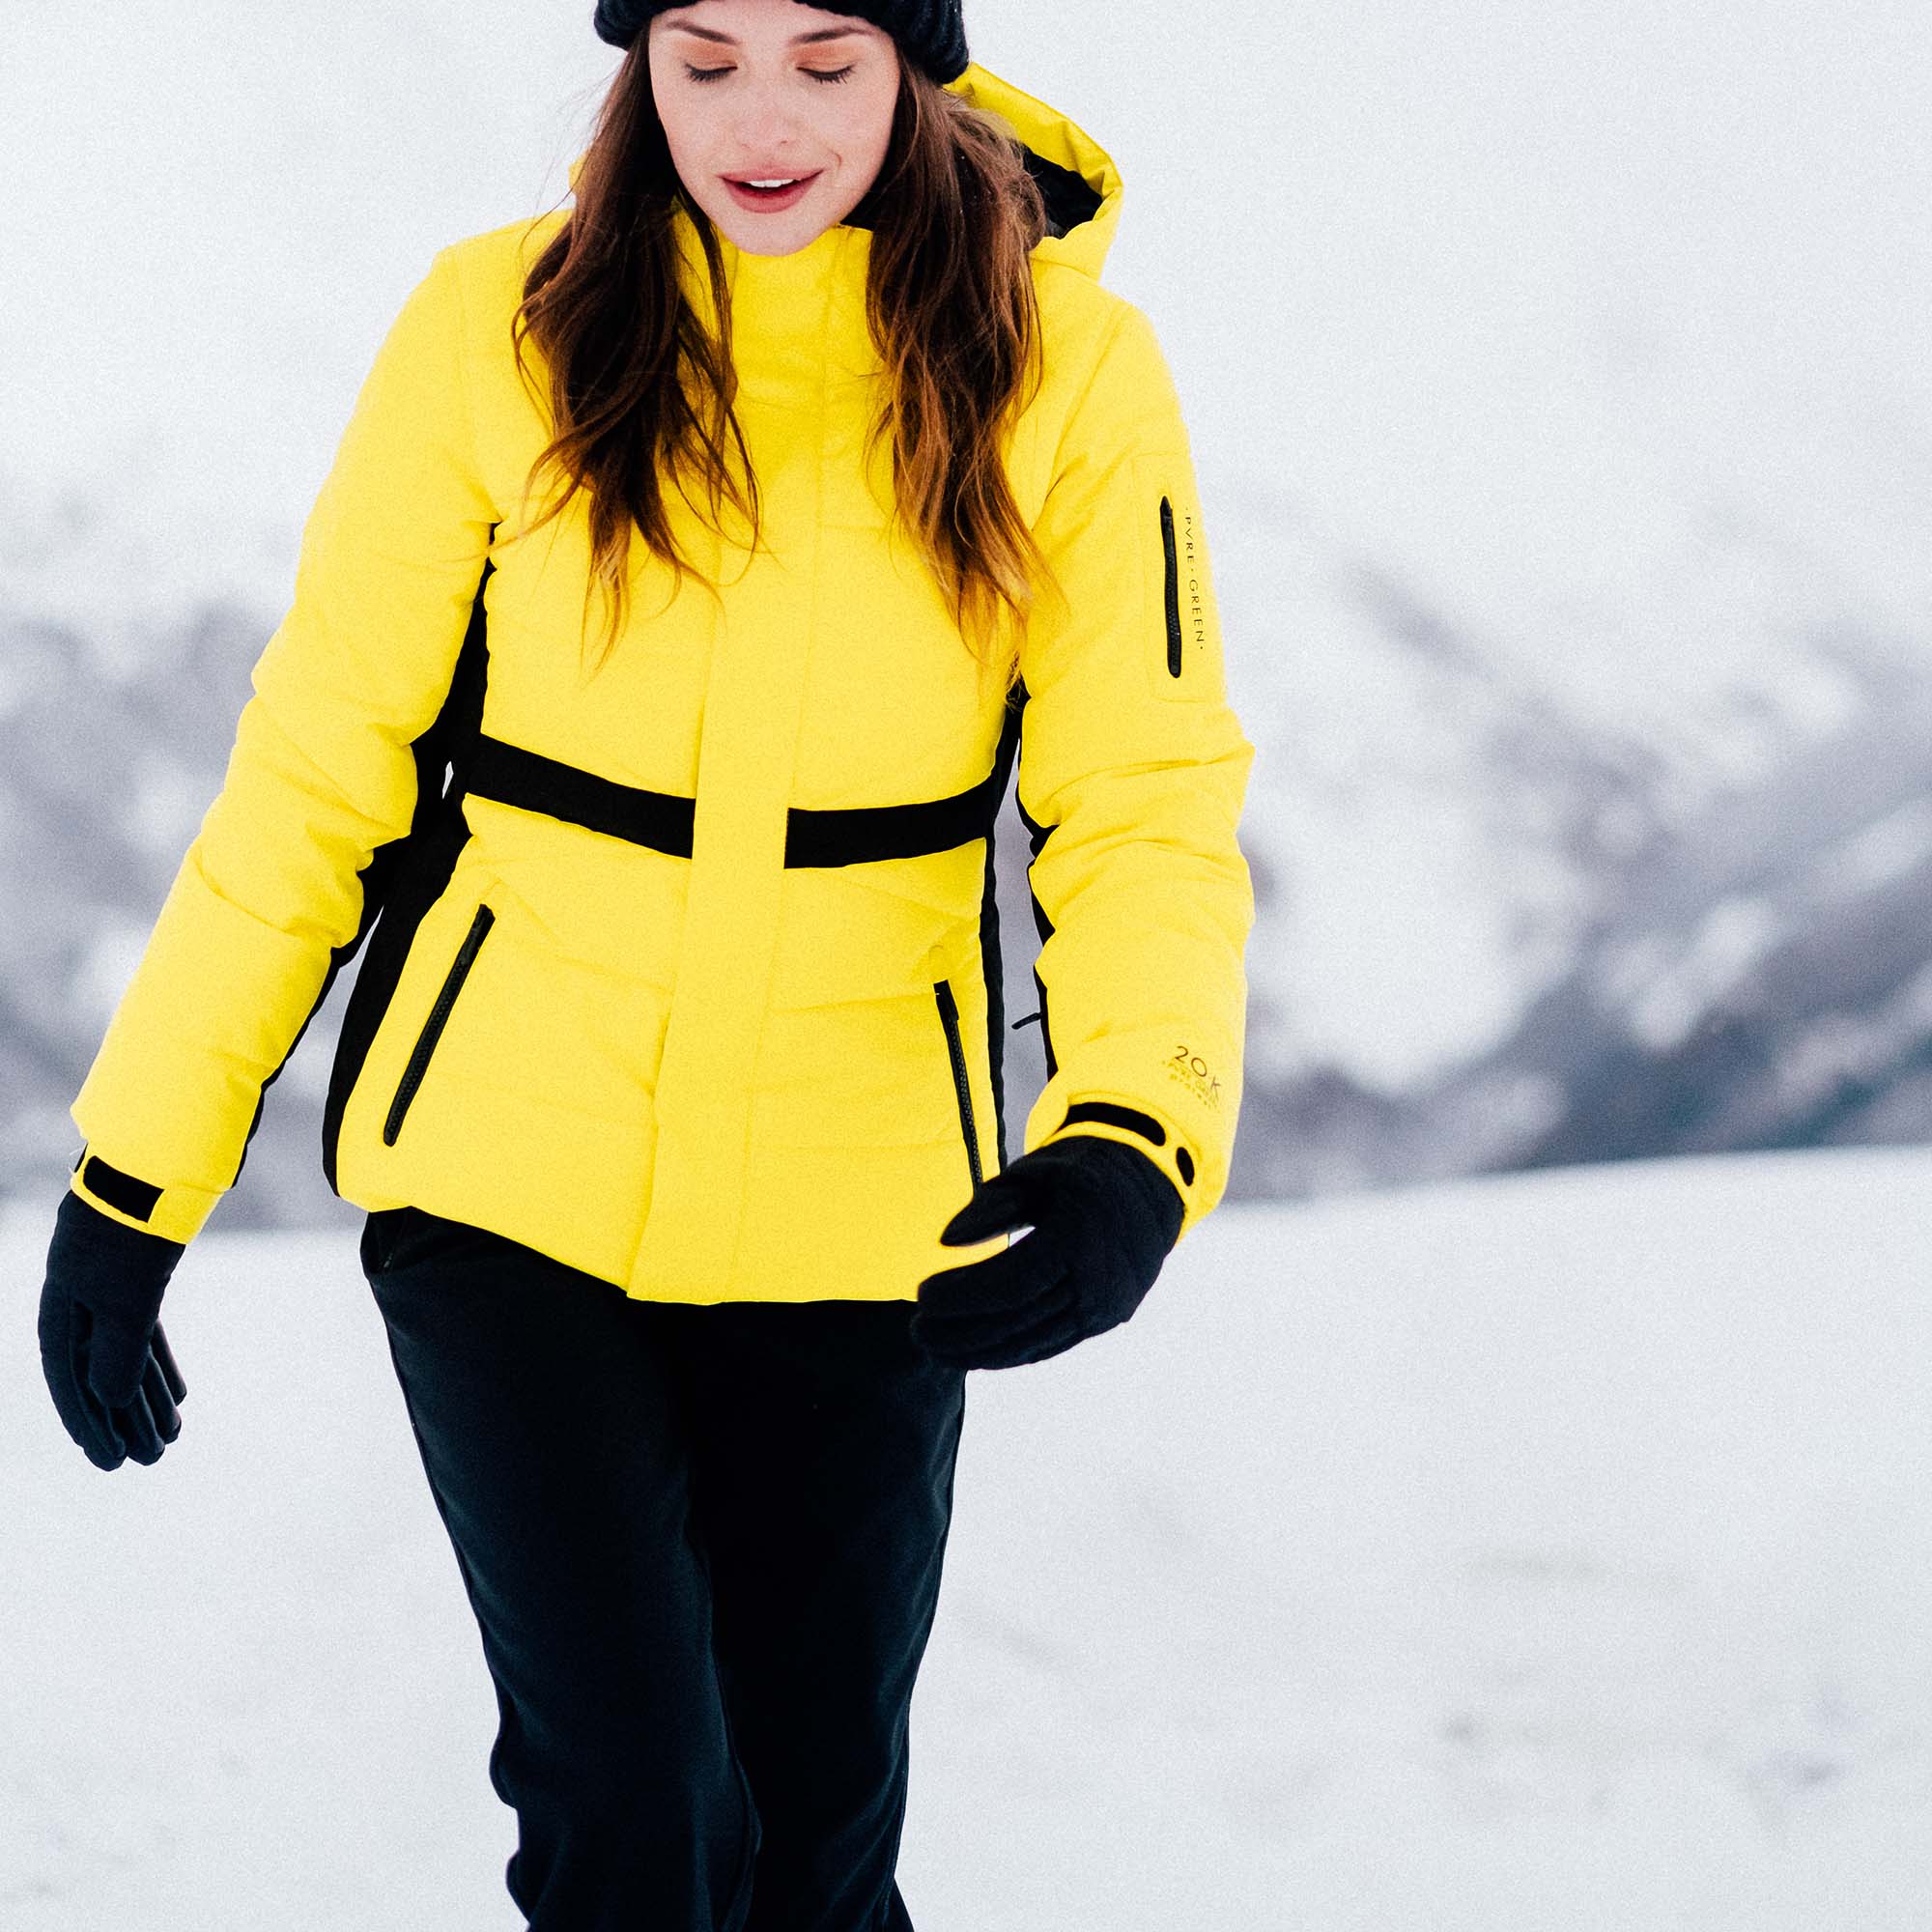 Buy Protest Lole Softshell Ski Trousers from £61.99 (Today) – Best